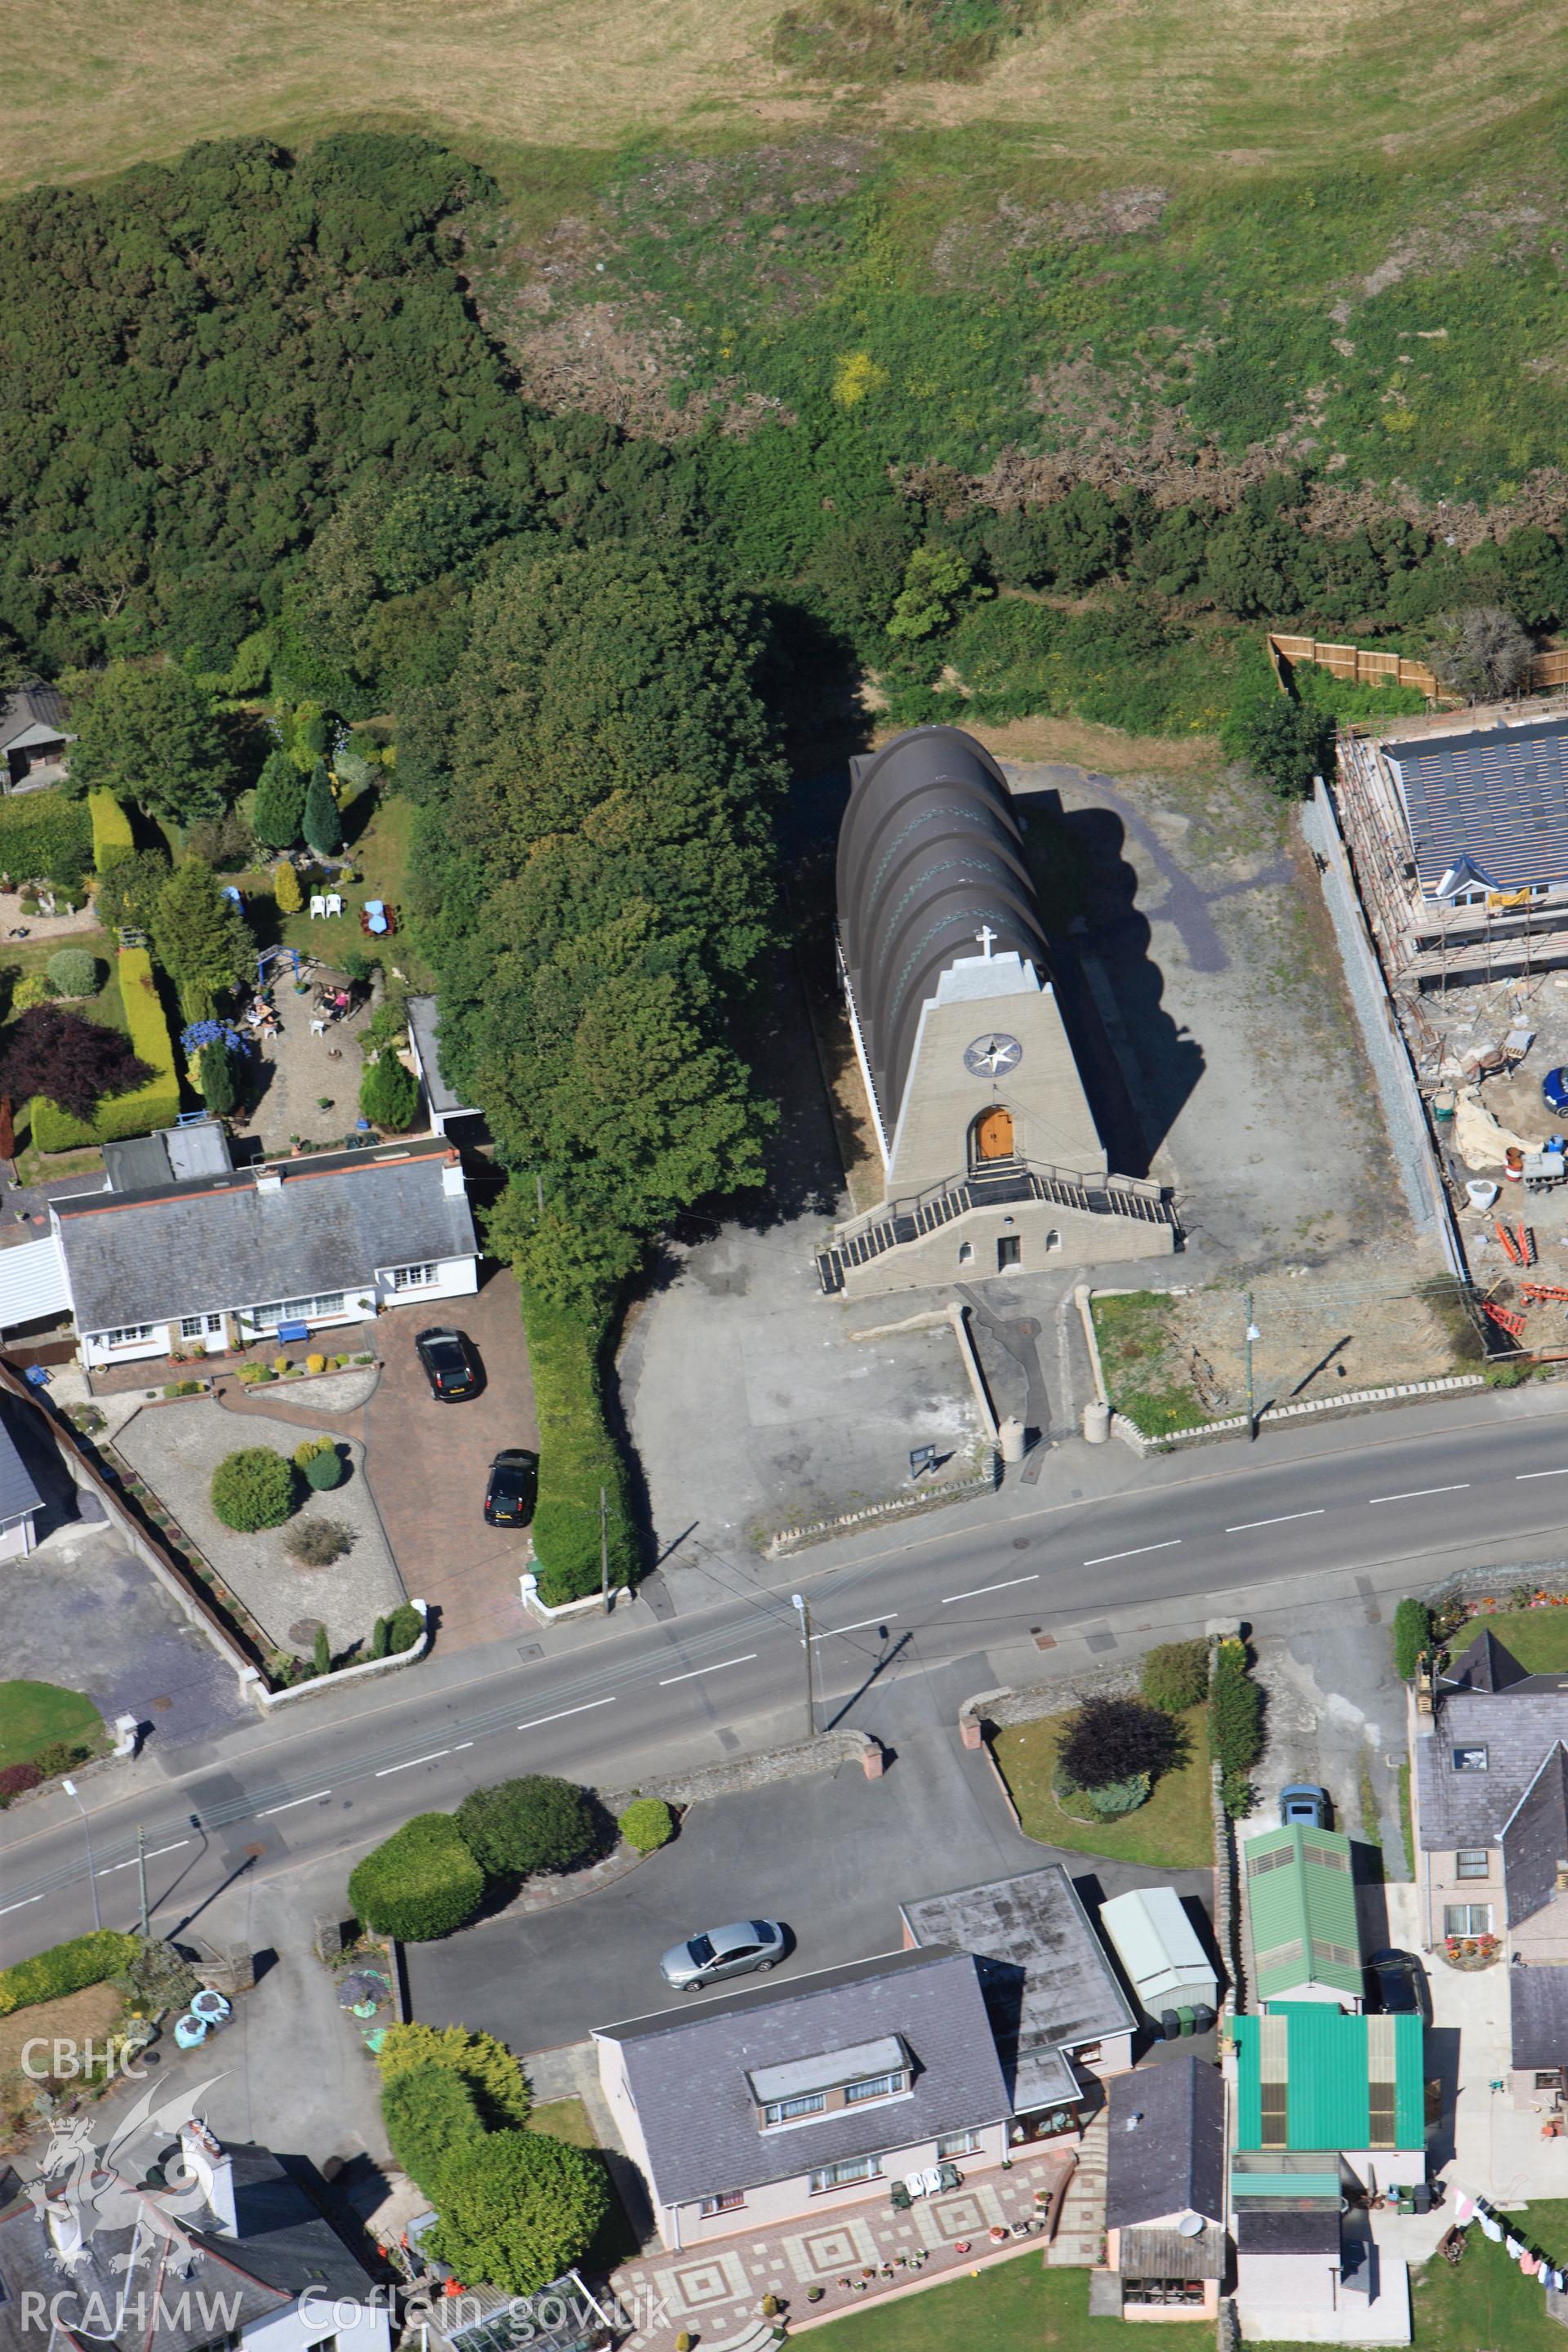 RCAHMW colour oblique photograph of Church of Our Lady Star of the Sea, Amlwch. Taken by Toby Driver on 20/07/2011.